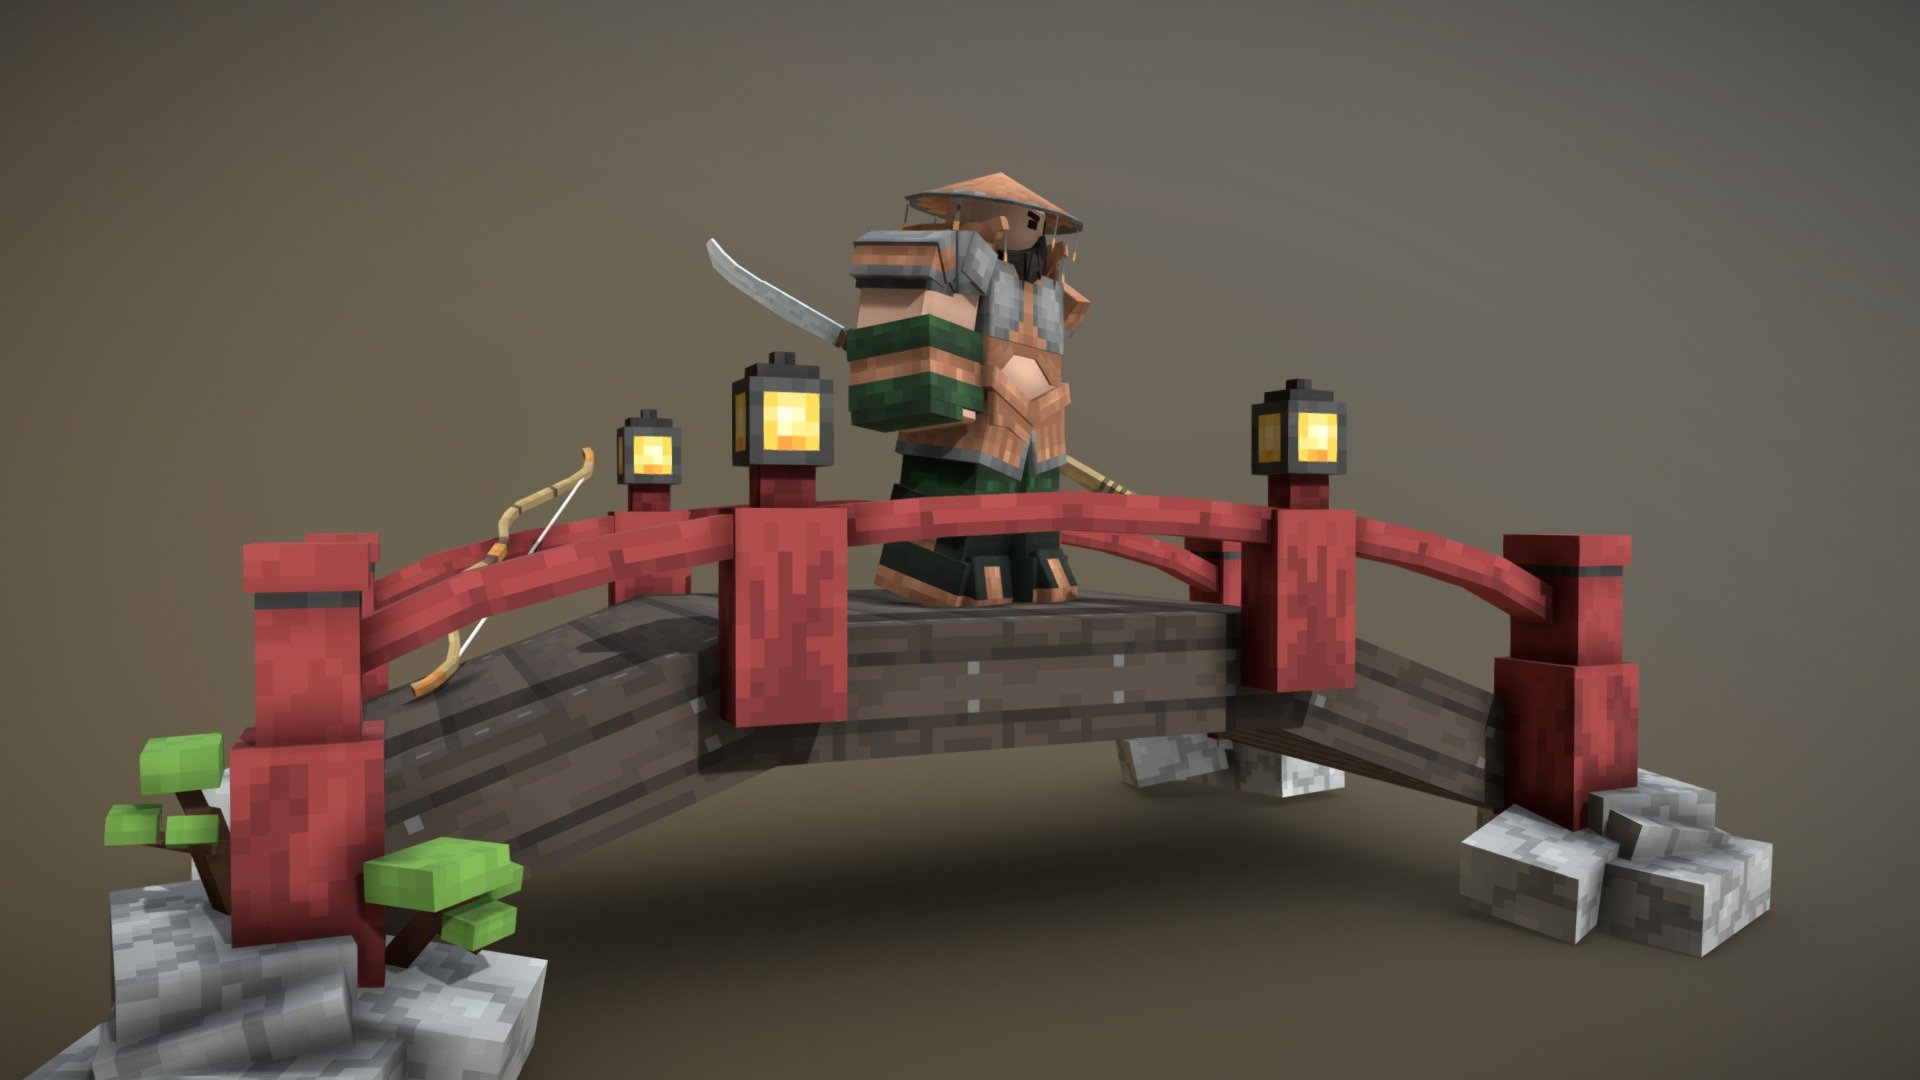 Namson is an Asian - Inspired assasin from the far east! Ready to tear away at all foes during the battles in the sky! This cosmetic kit will be available to play on the Roblox game, Skywars. Hope you enjoy! - Namson - Ultimate assasin! - 3D model by nitsan 3d model